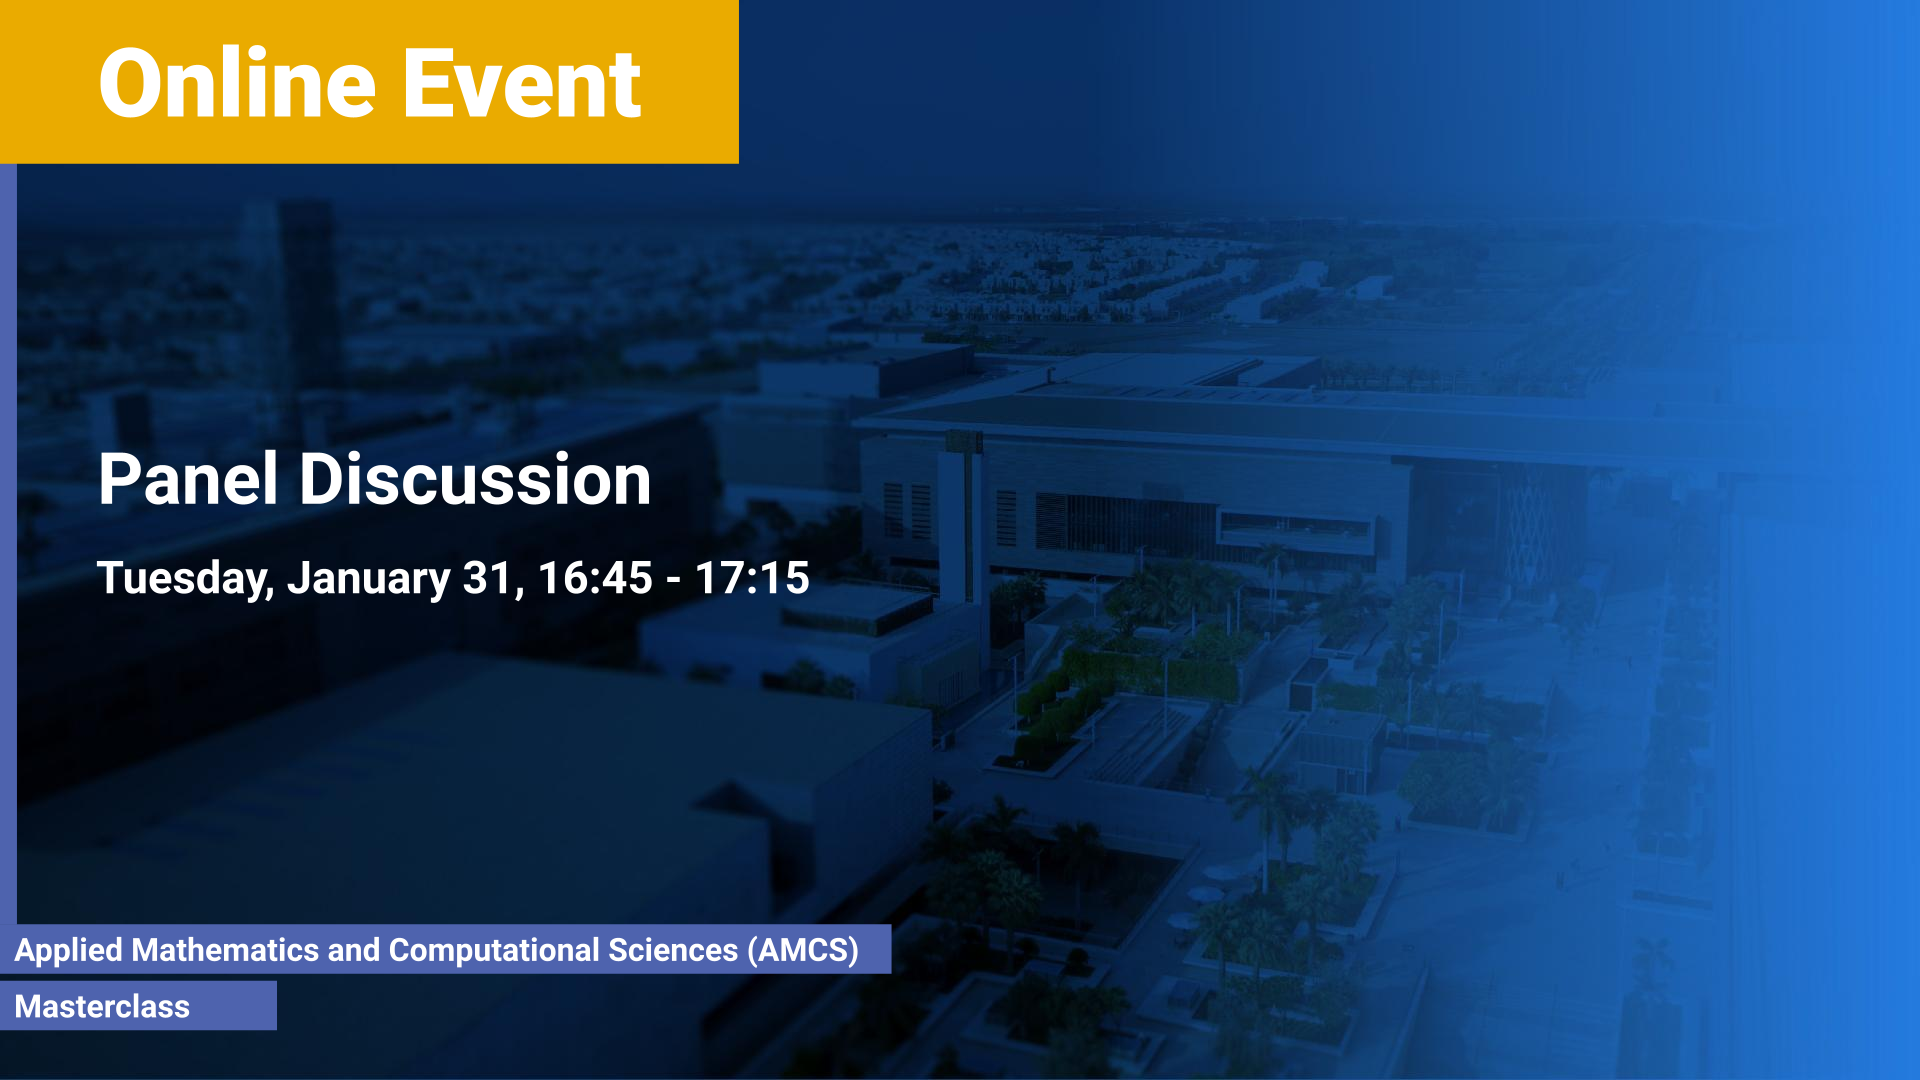 KAUST-CEMSE-AMCS-Masterclass-Applied-Nonlinear-PDEs-Panel-Discussion-2